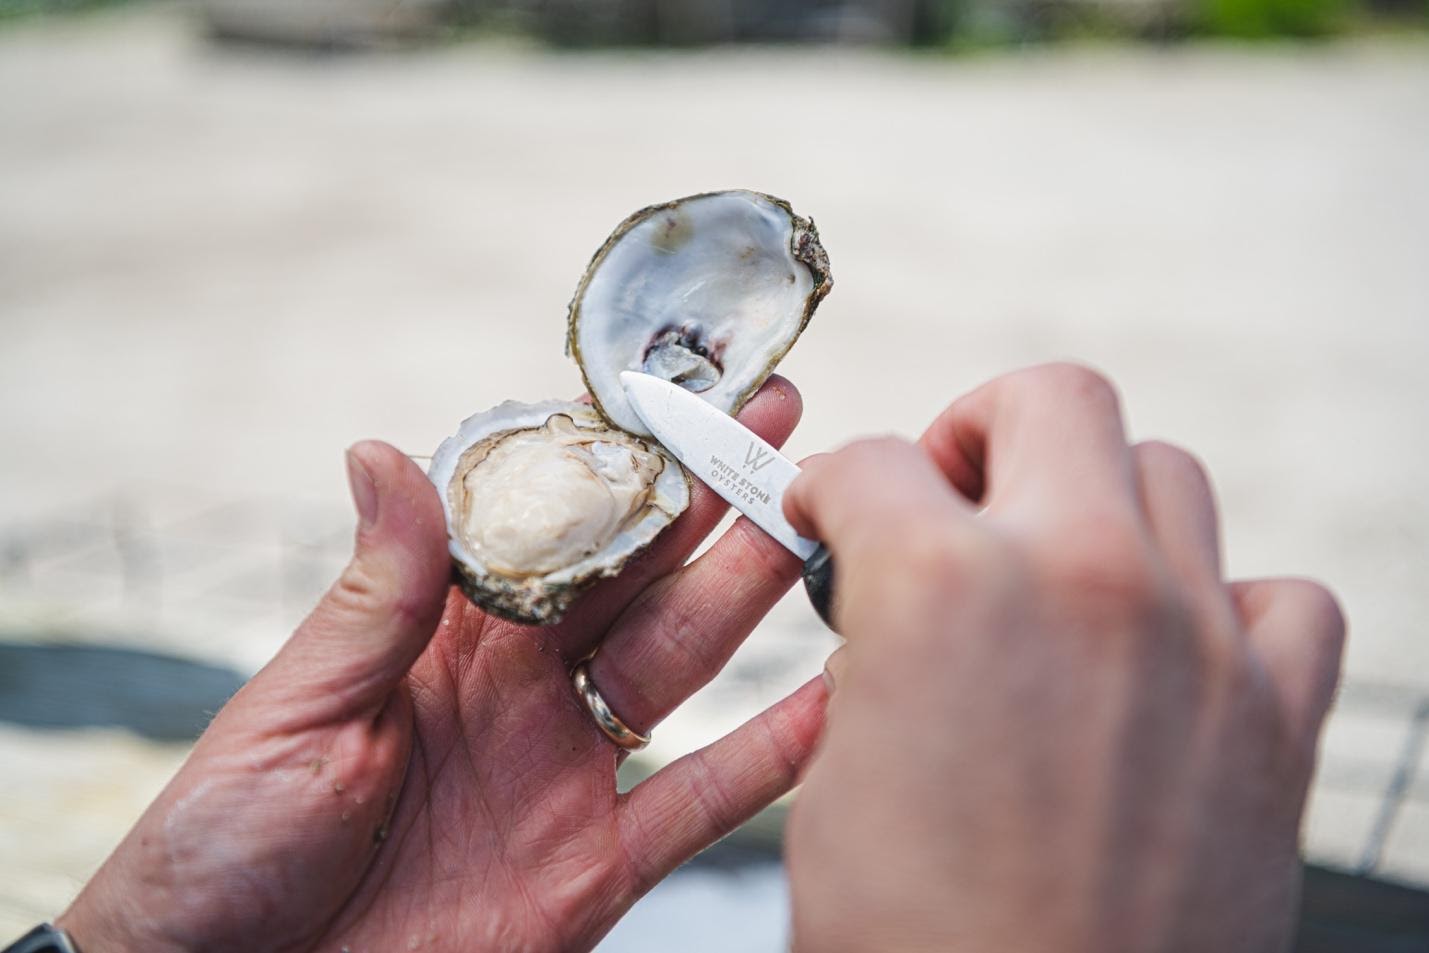 Using an oyster knife to scoop a delicious raw oyster from whitestone oysters